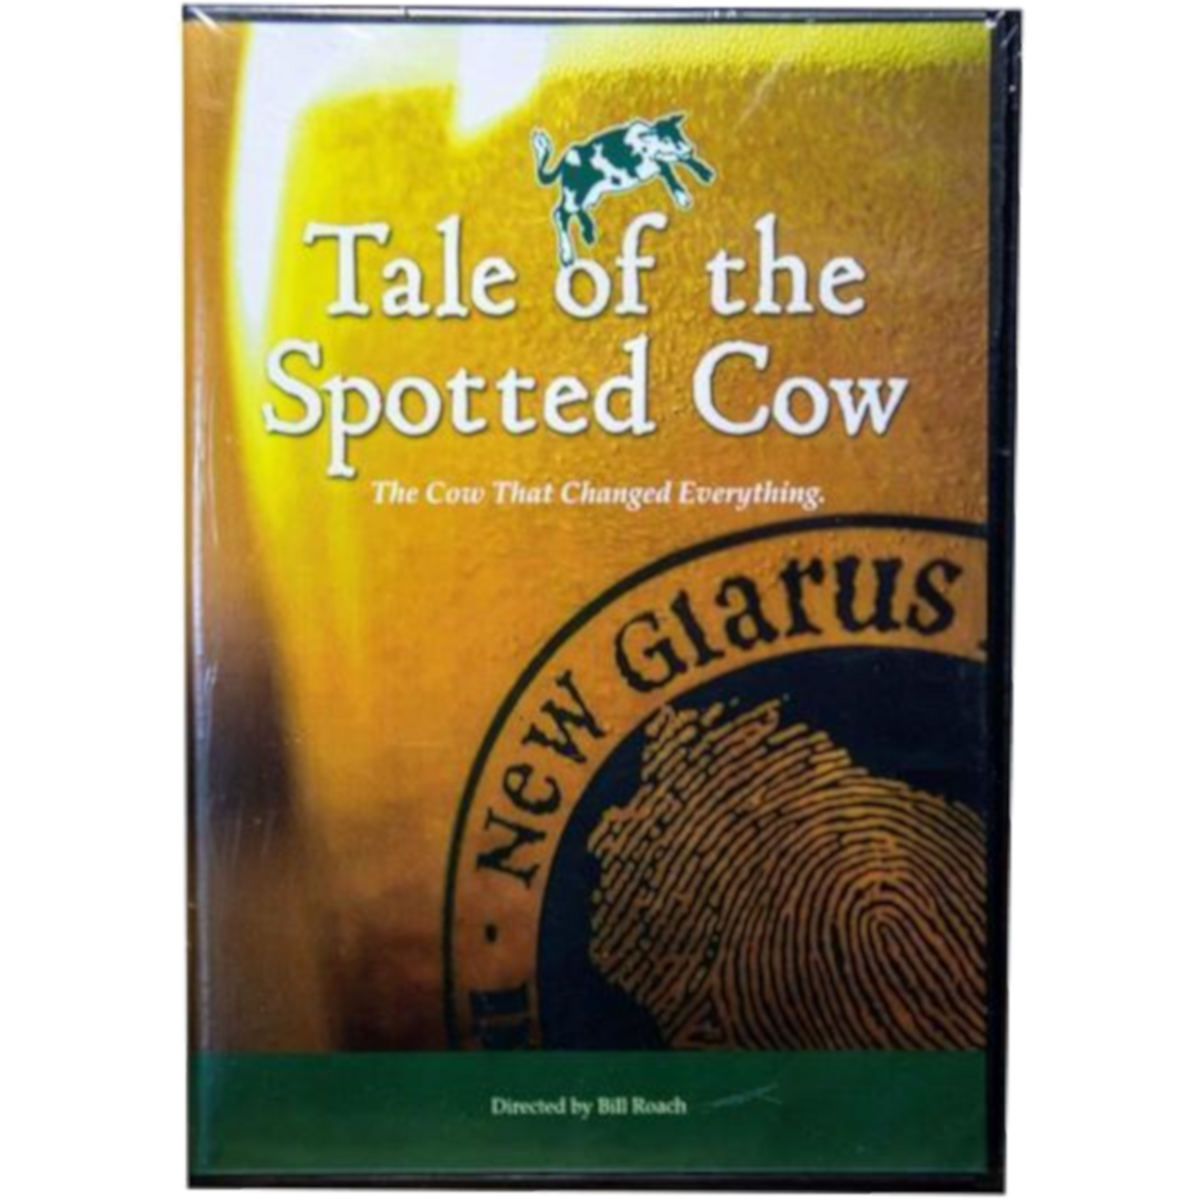 DVD entitled Tale of the Spotted Cow, The Cow That Changed Everything.